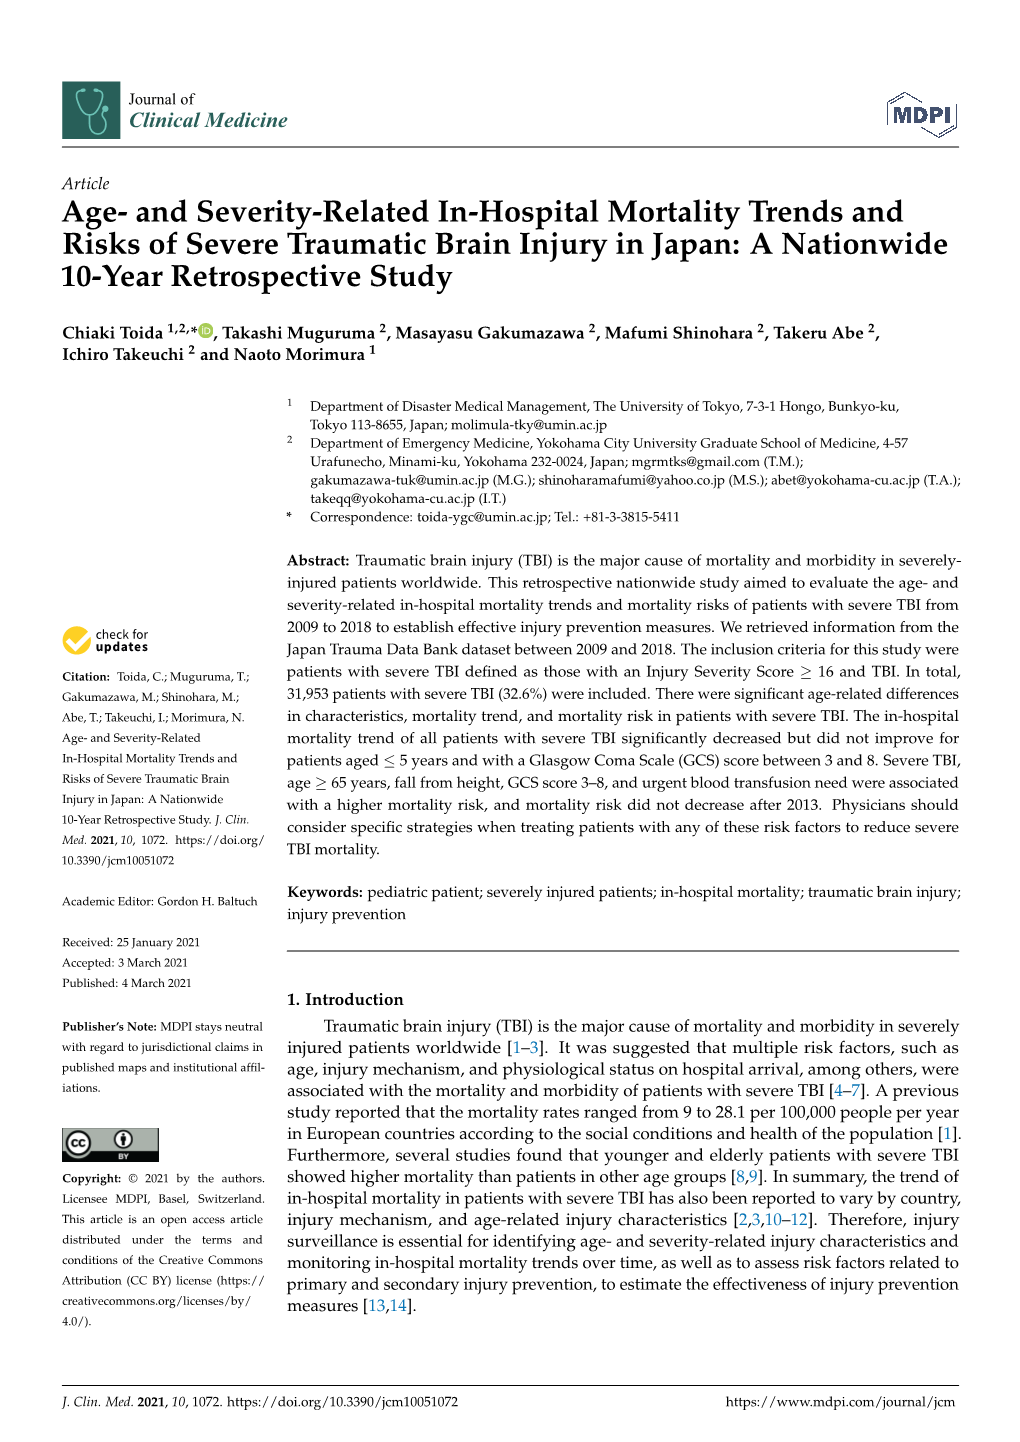 Age- and Severity-Related In-Hospital Mortality Trends and Risks of Severe Traumatic Brain Injury in Japan: a Nationwide 10-Year Retrospective Study